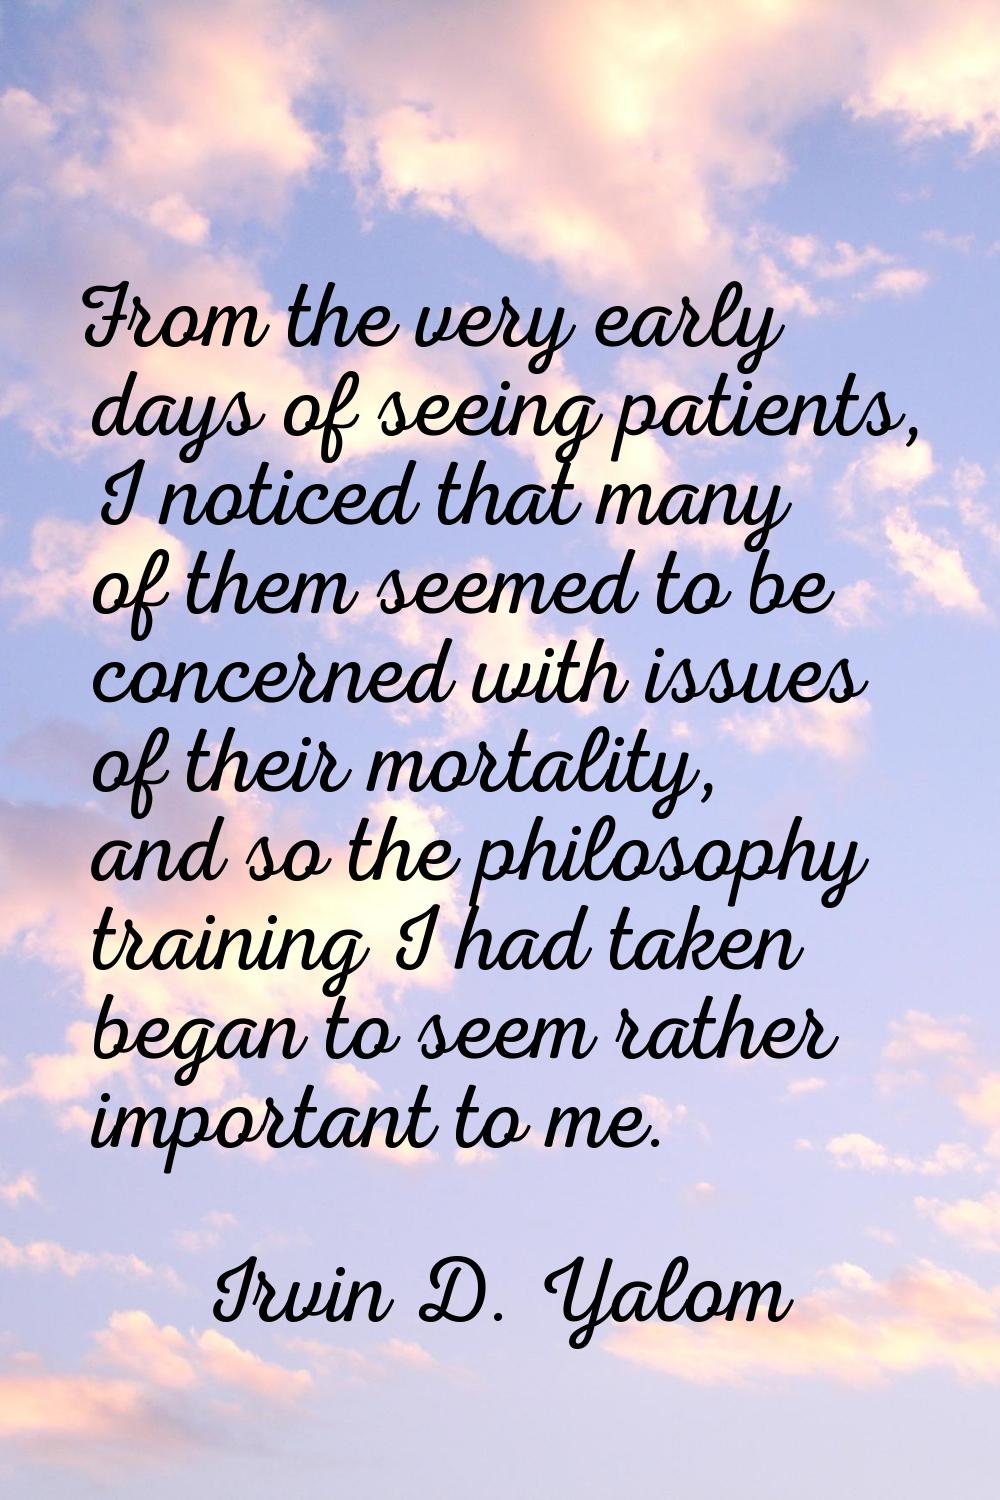 From the very early days of seeing patients, I noticed that many of them seemed to be concerned wit